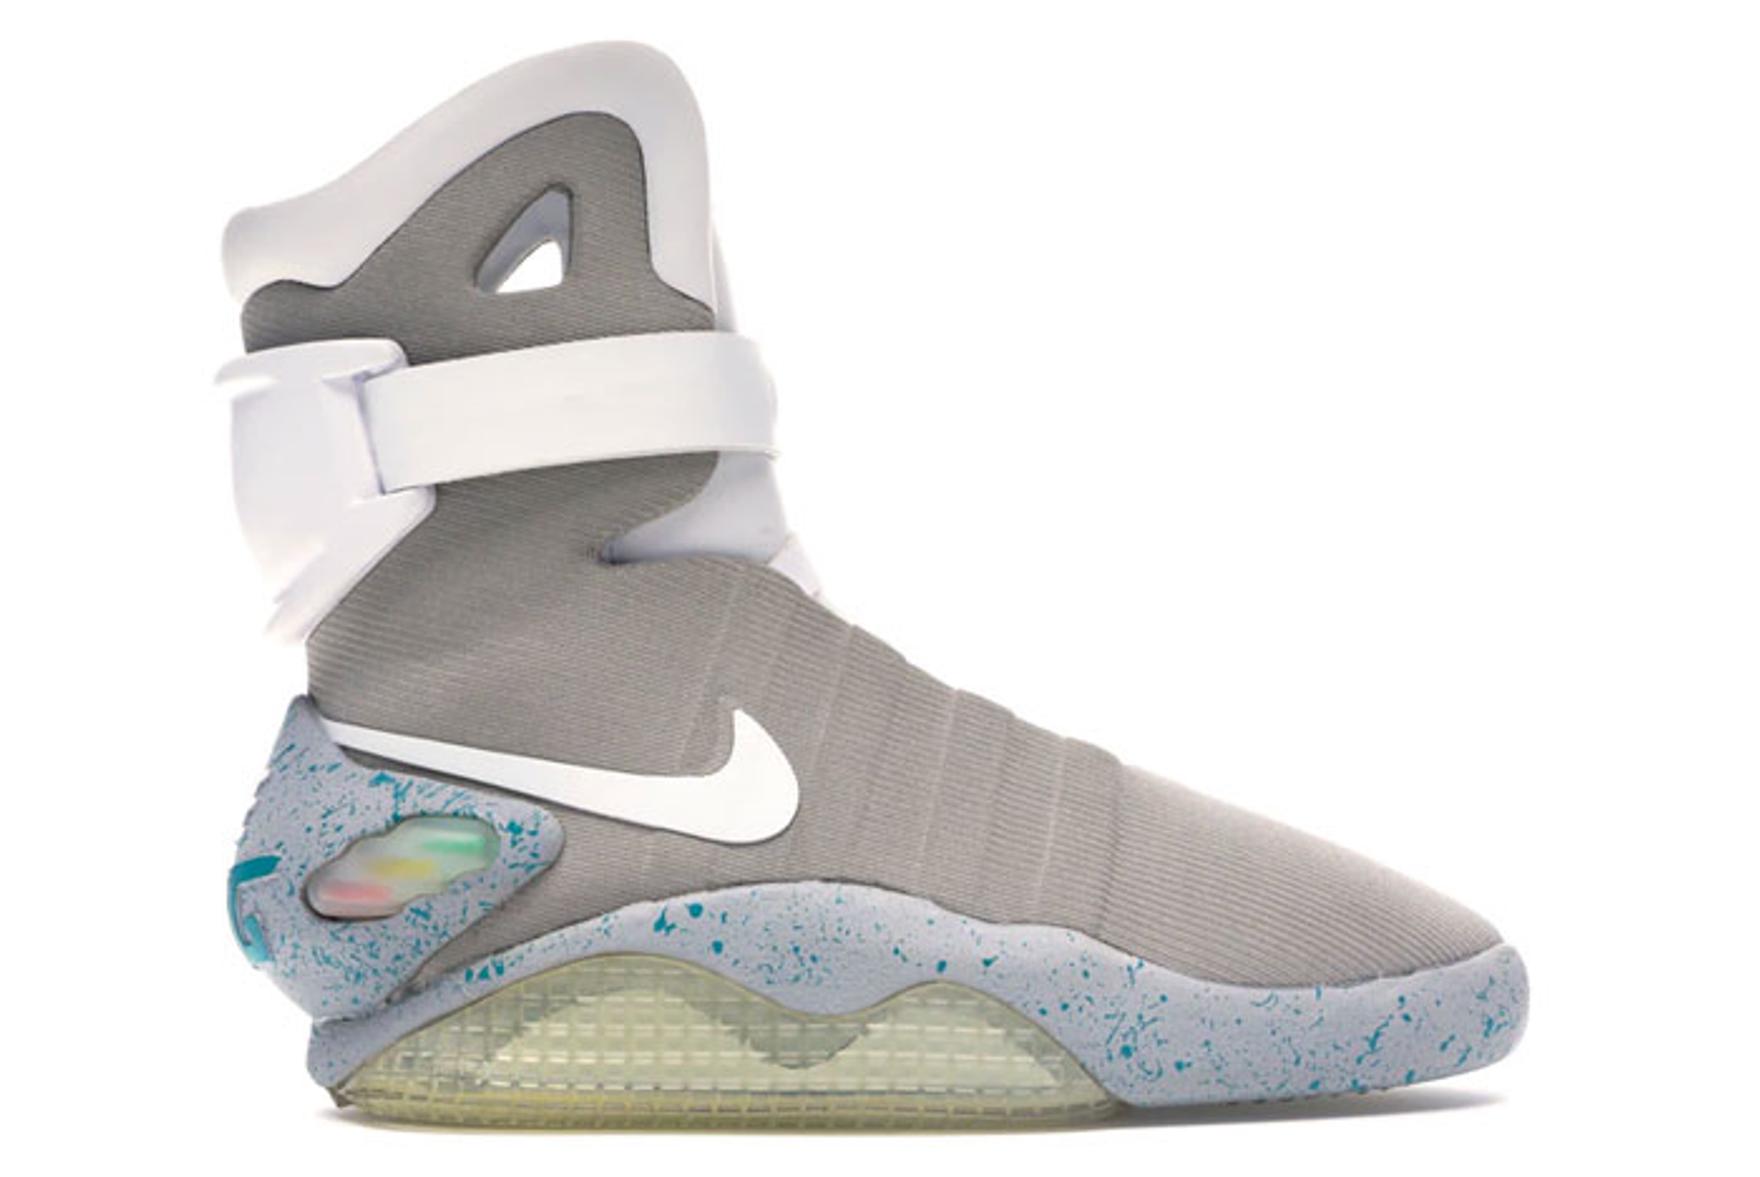 Nike Mag 2011 Right